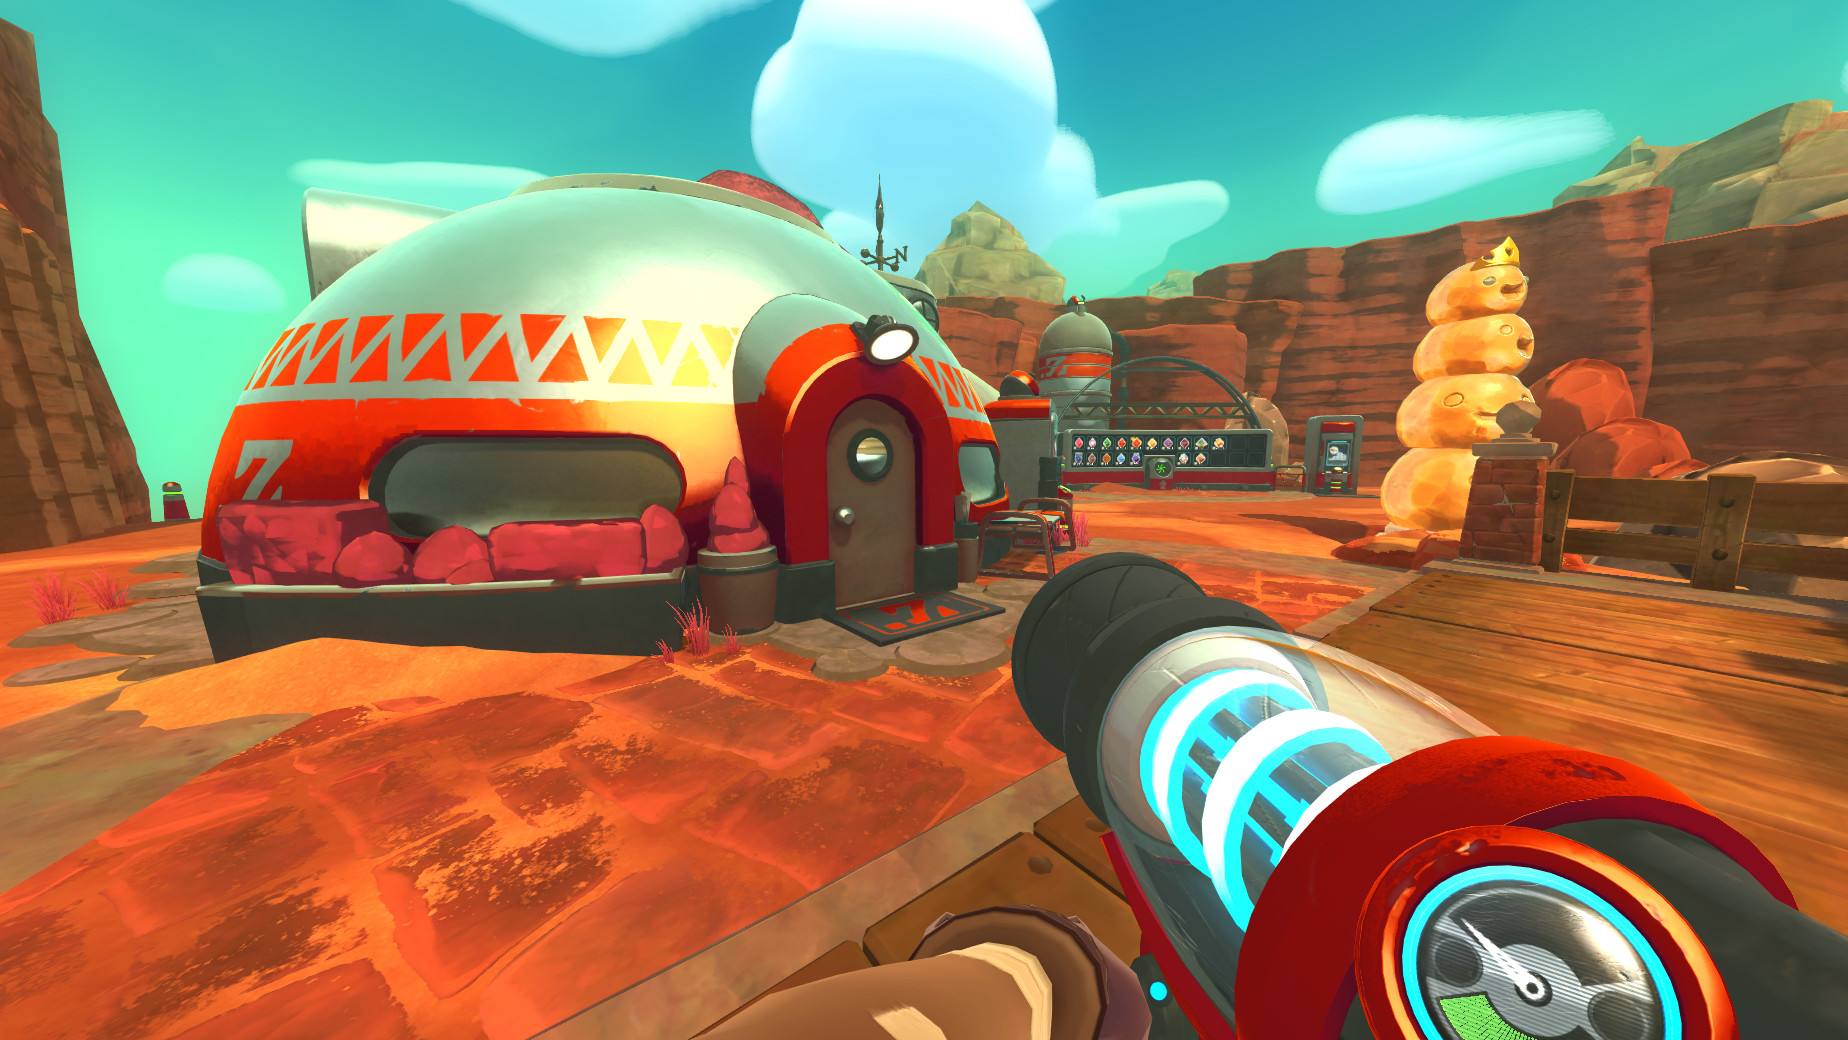 The home pod in Slime Rancher